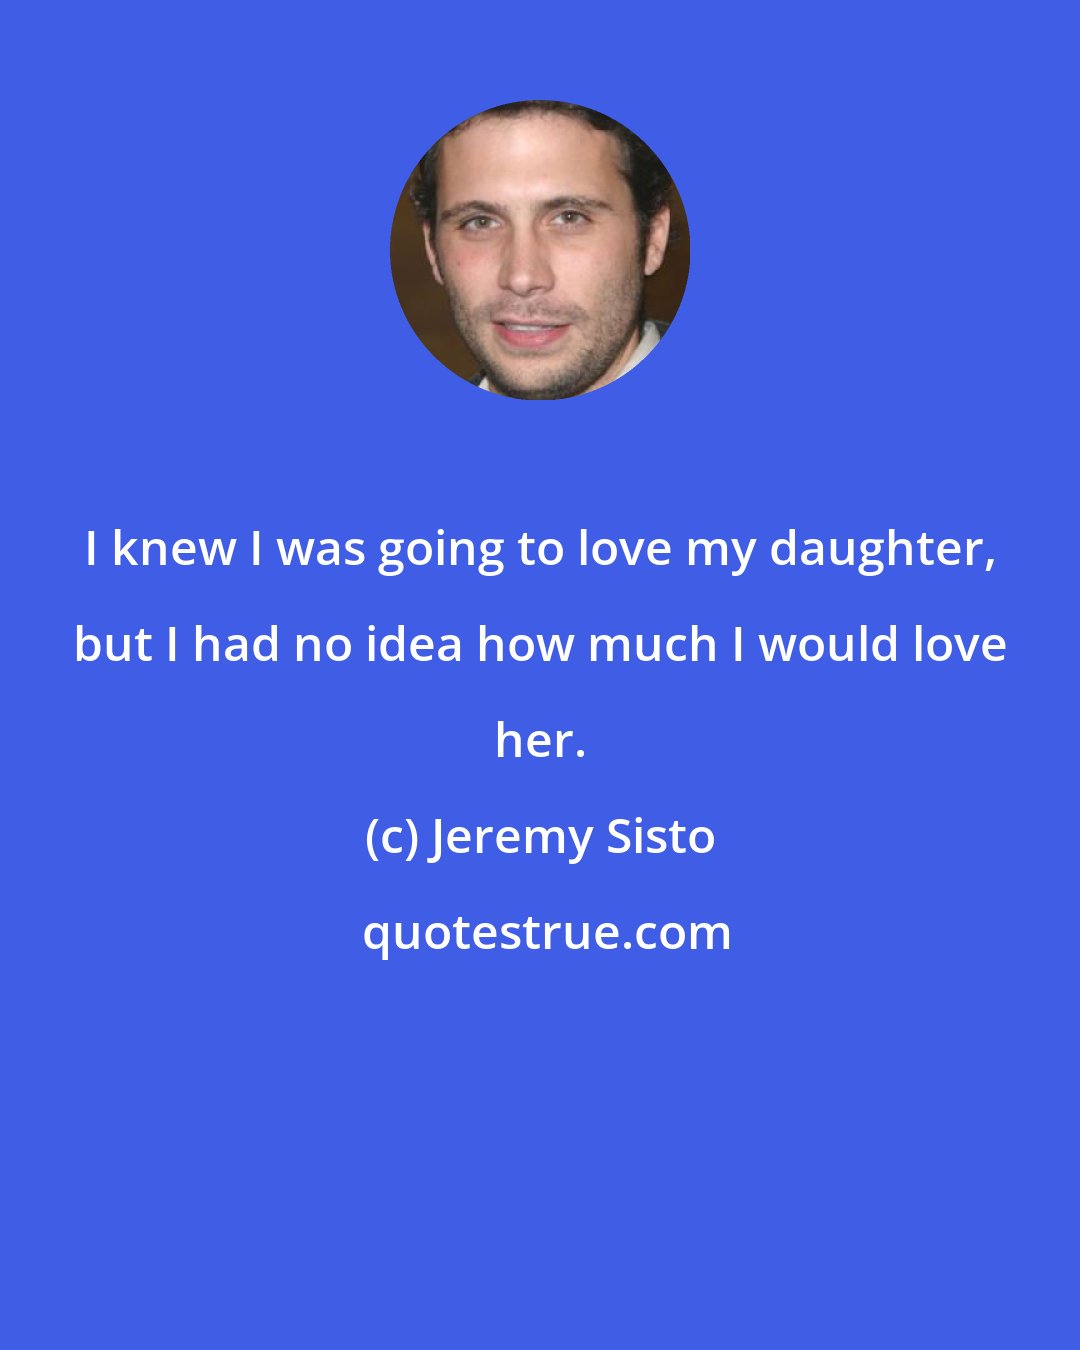 Jeremy Sisto: I knew I was going to love my daughter, but I had no idea how much I would love her.